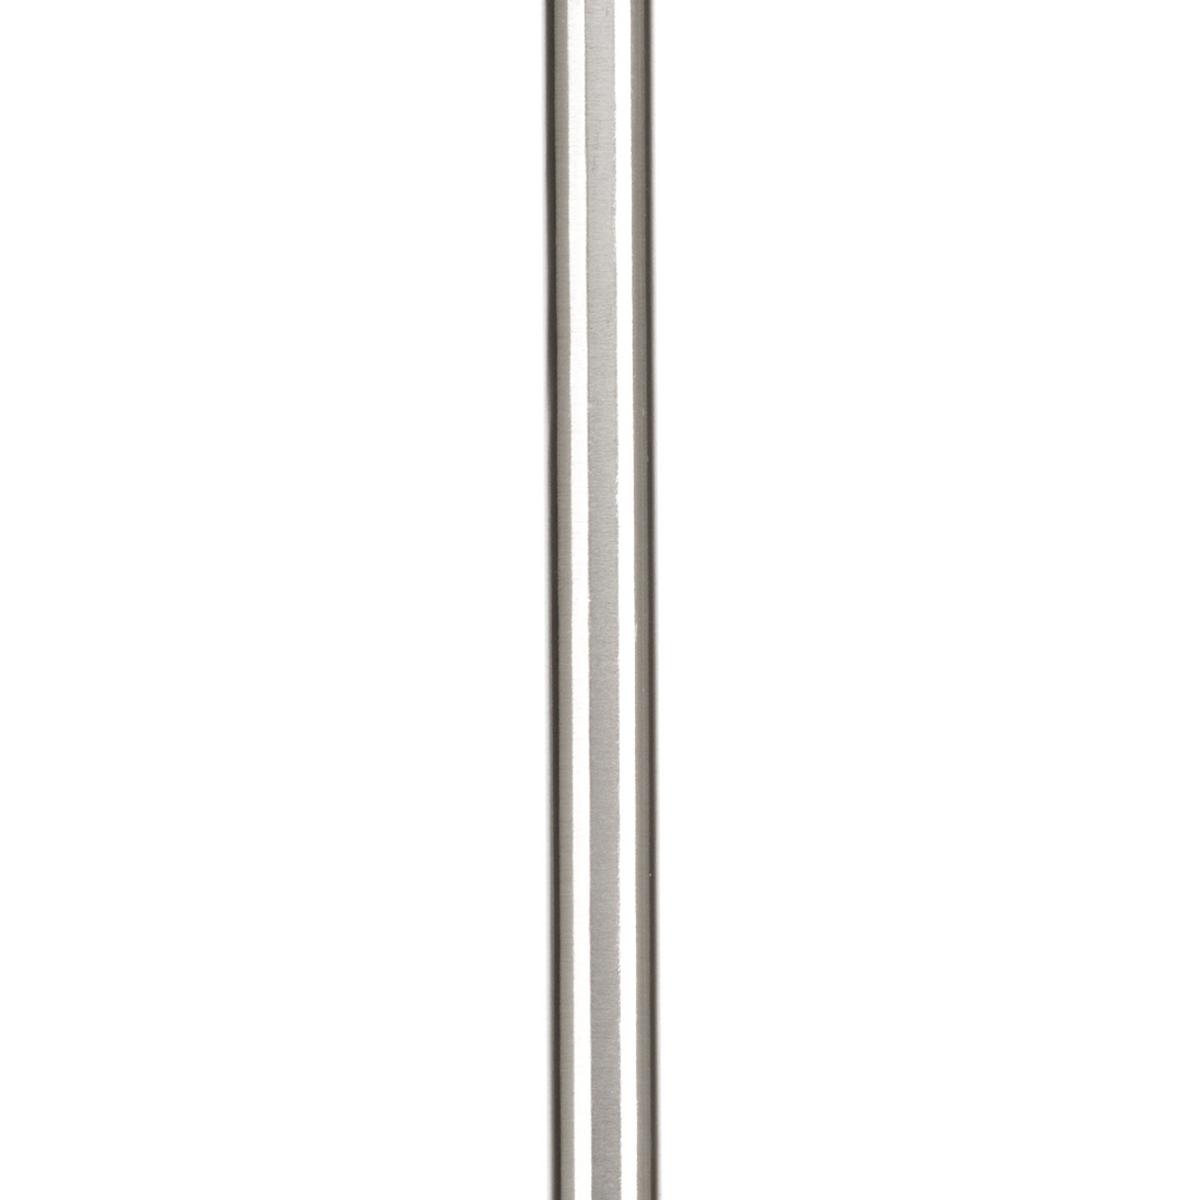 Hubbell P8602-09 Stem extension kit with 2-6" and 1-12" stems included. Requires at least one link of chain at the top of fixture (not included). Brushed Nickel finish.  ; Brushed Nickel finish. ; Includes two 6", one 12" stems and of chain.